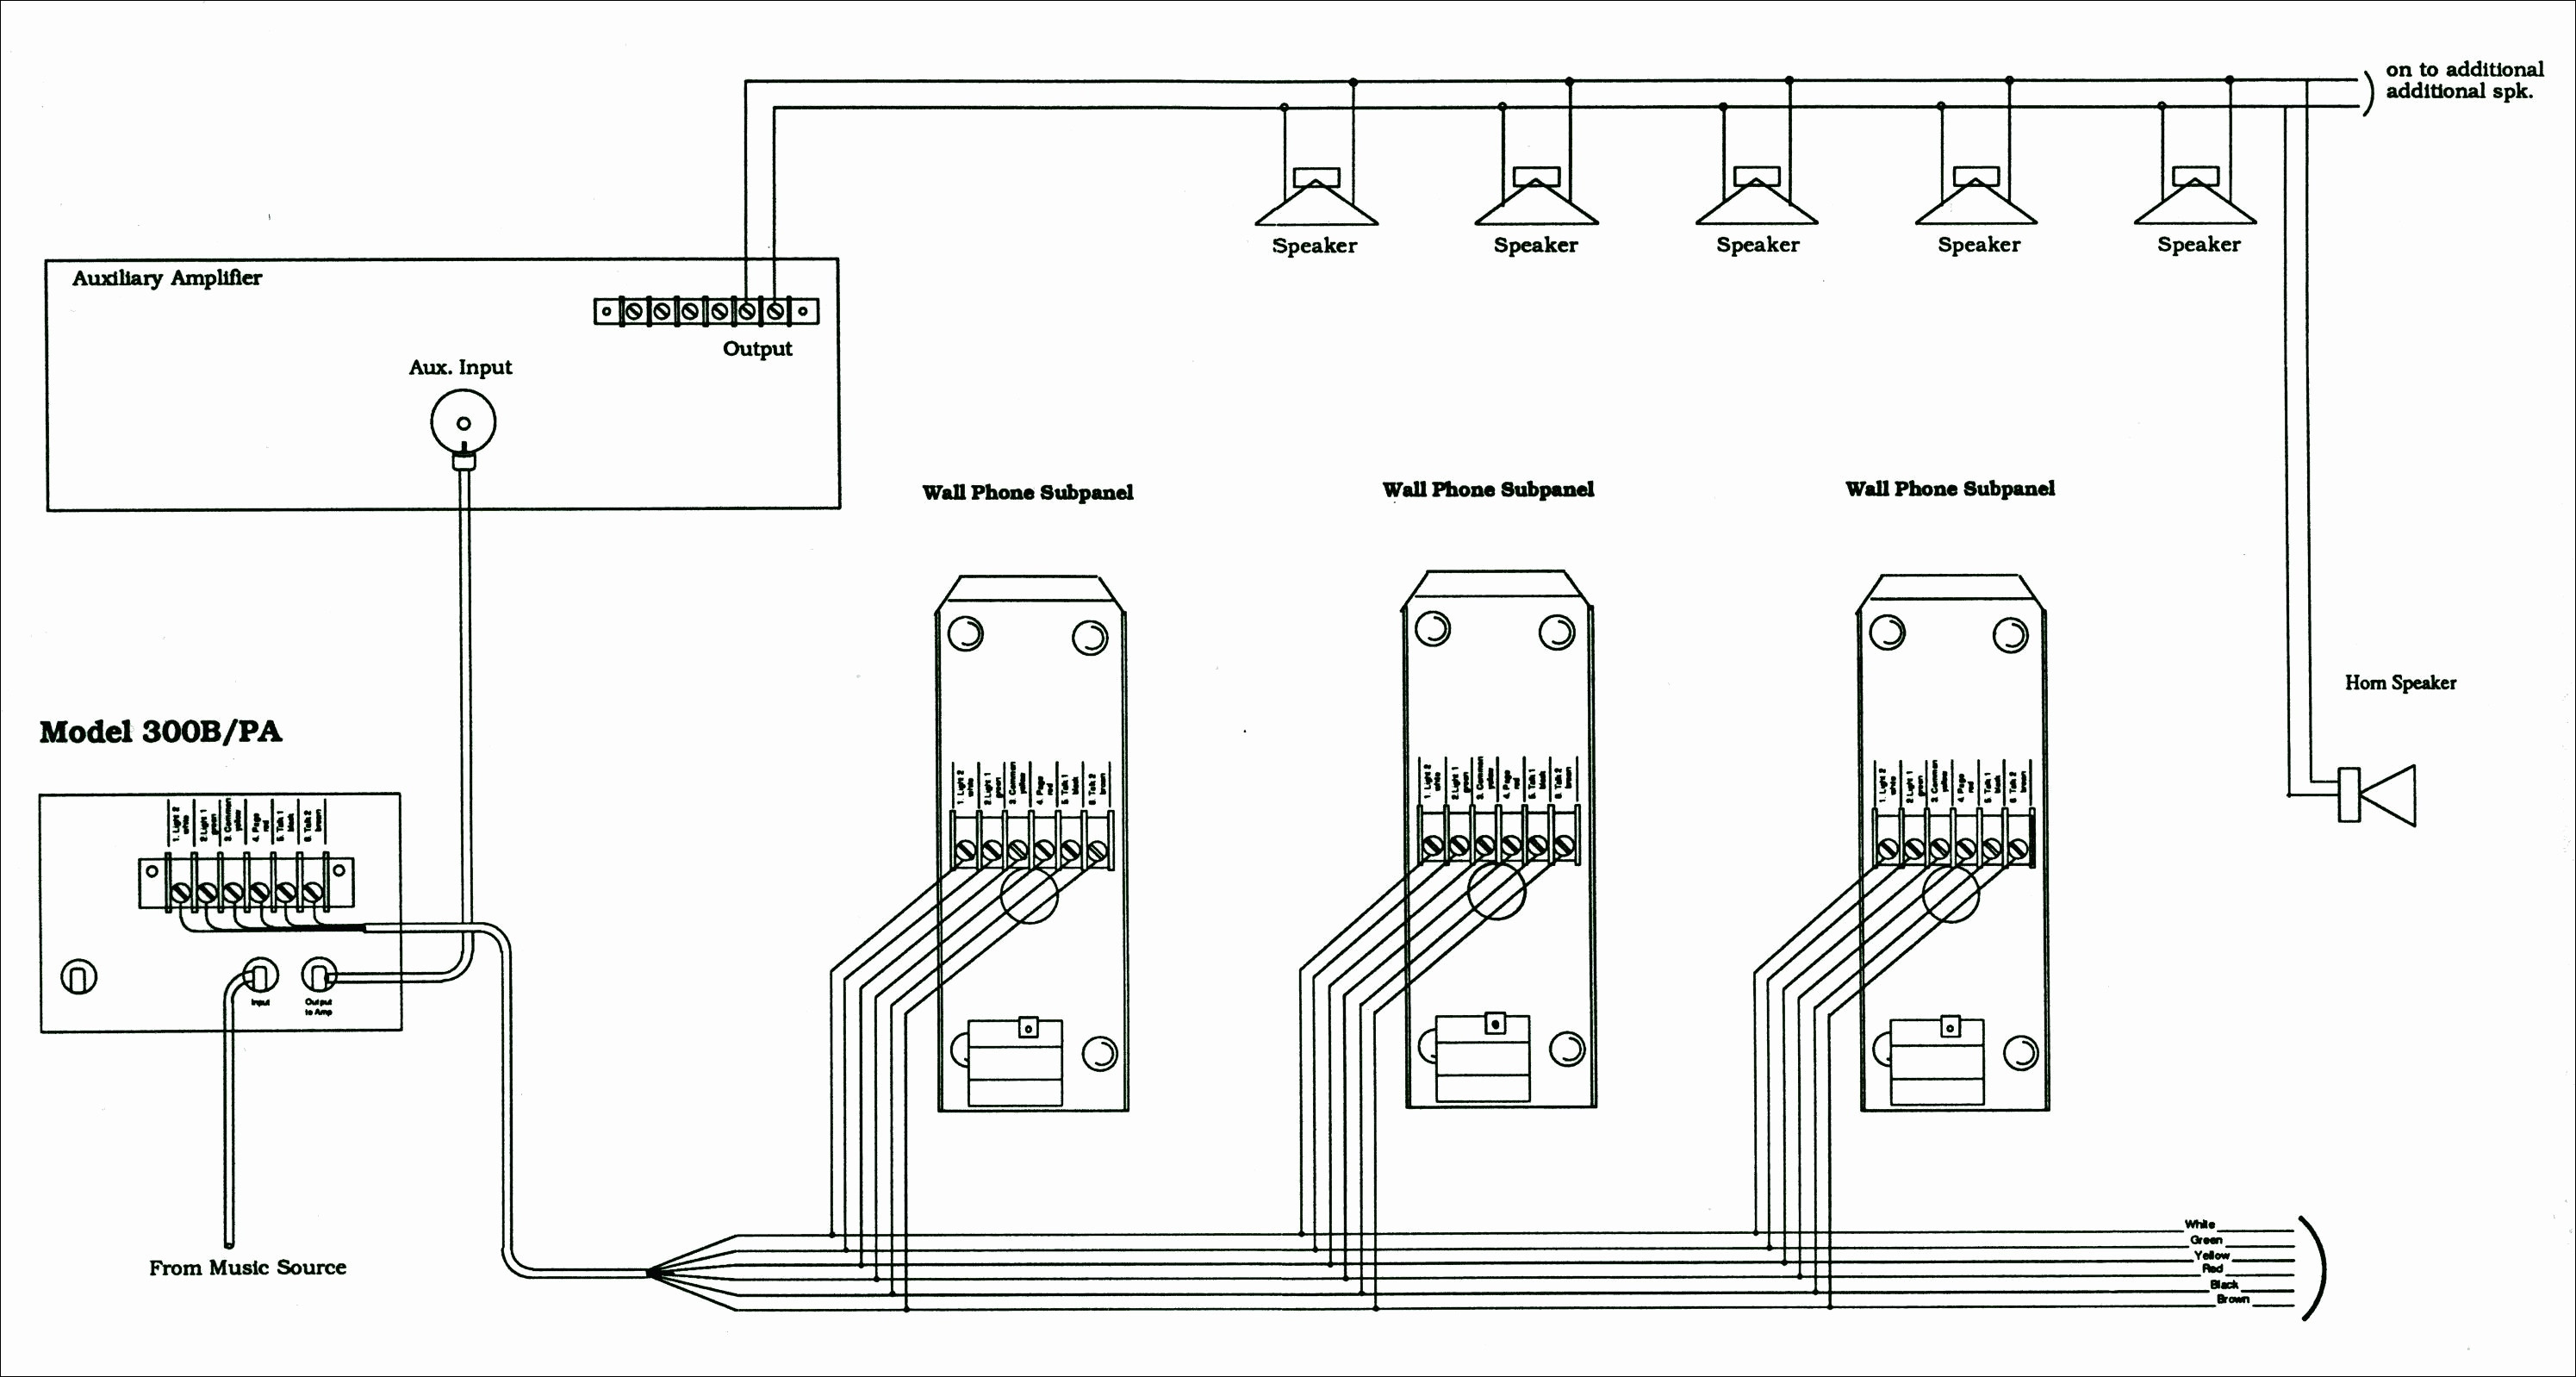 Telephone Junction Box Wiring Diagram from 2020cadillac.com